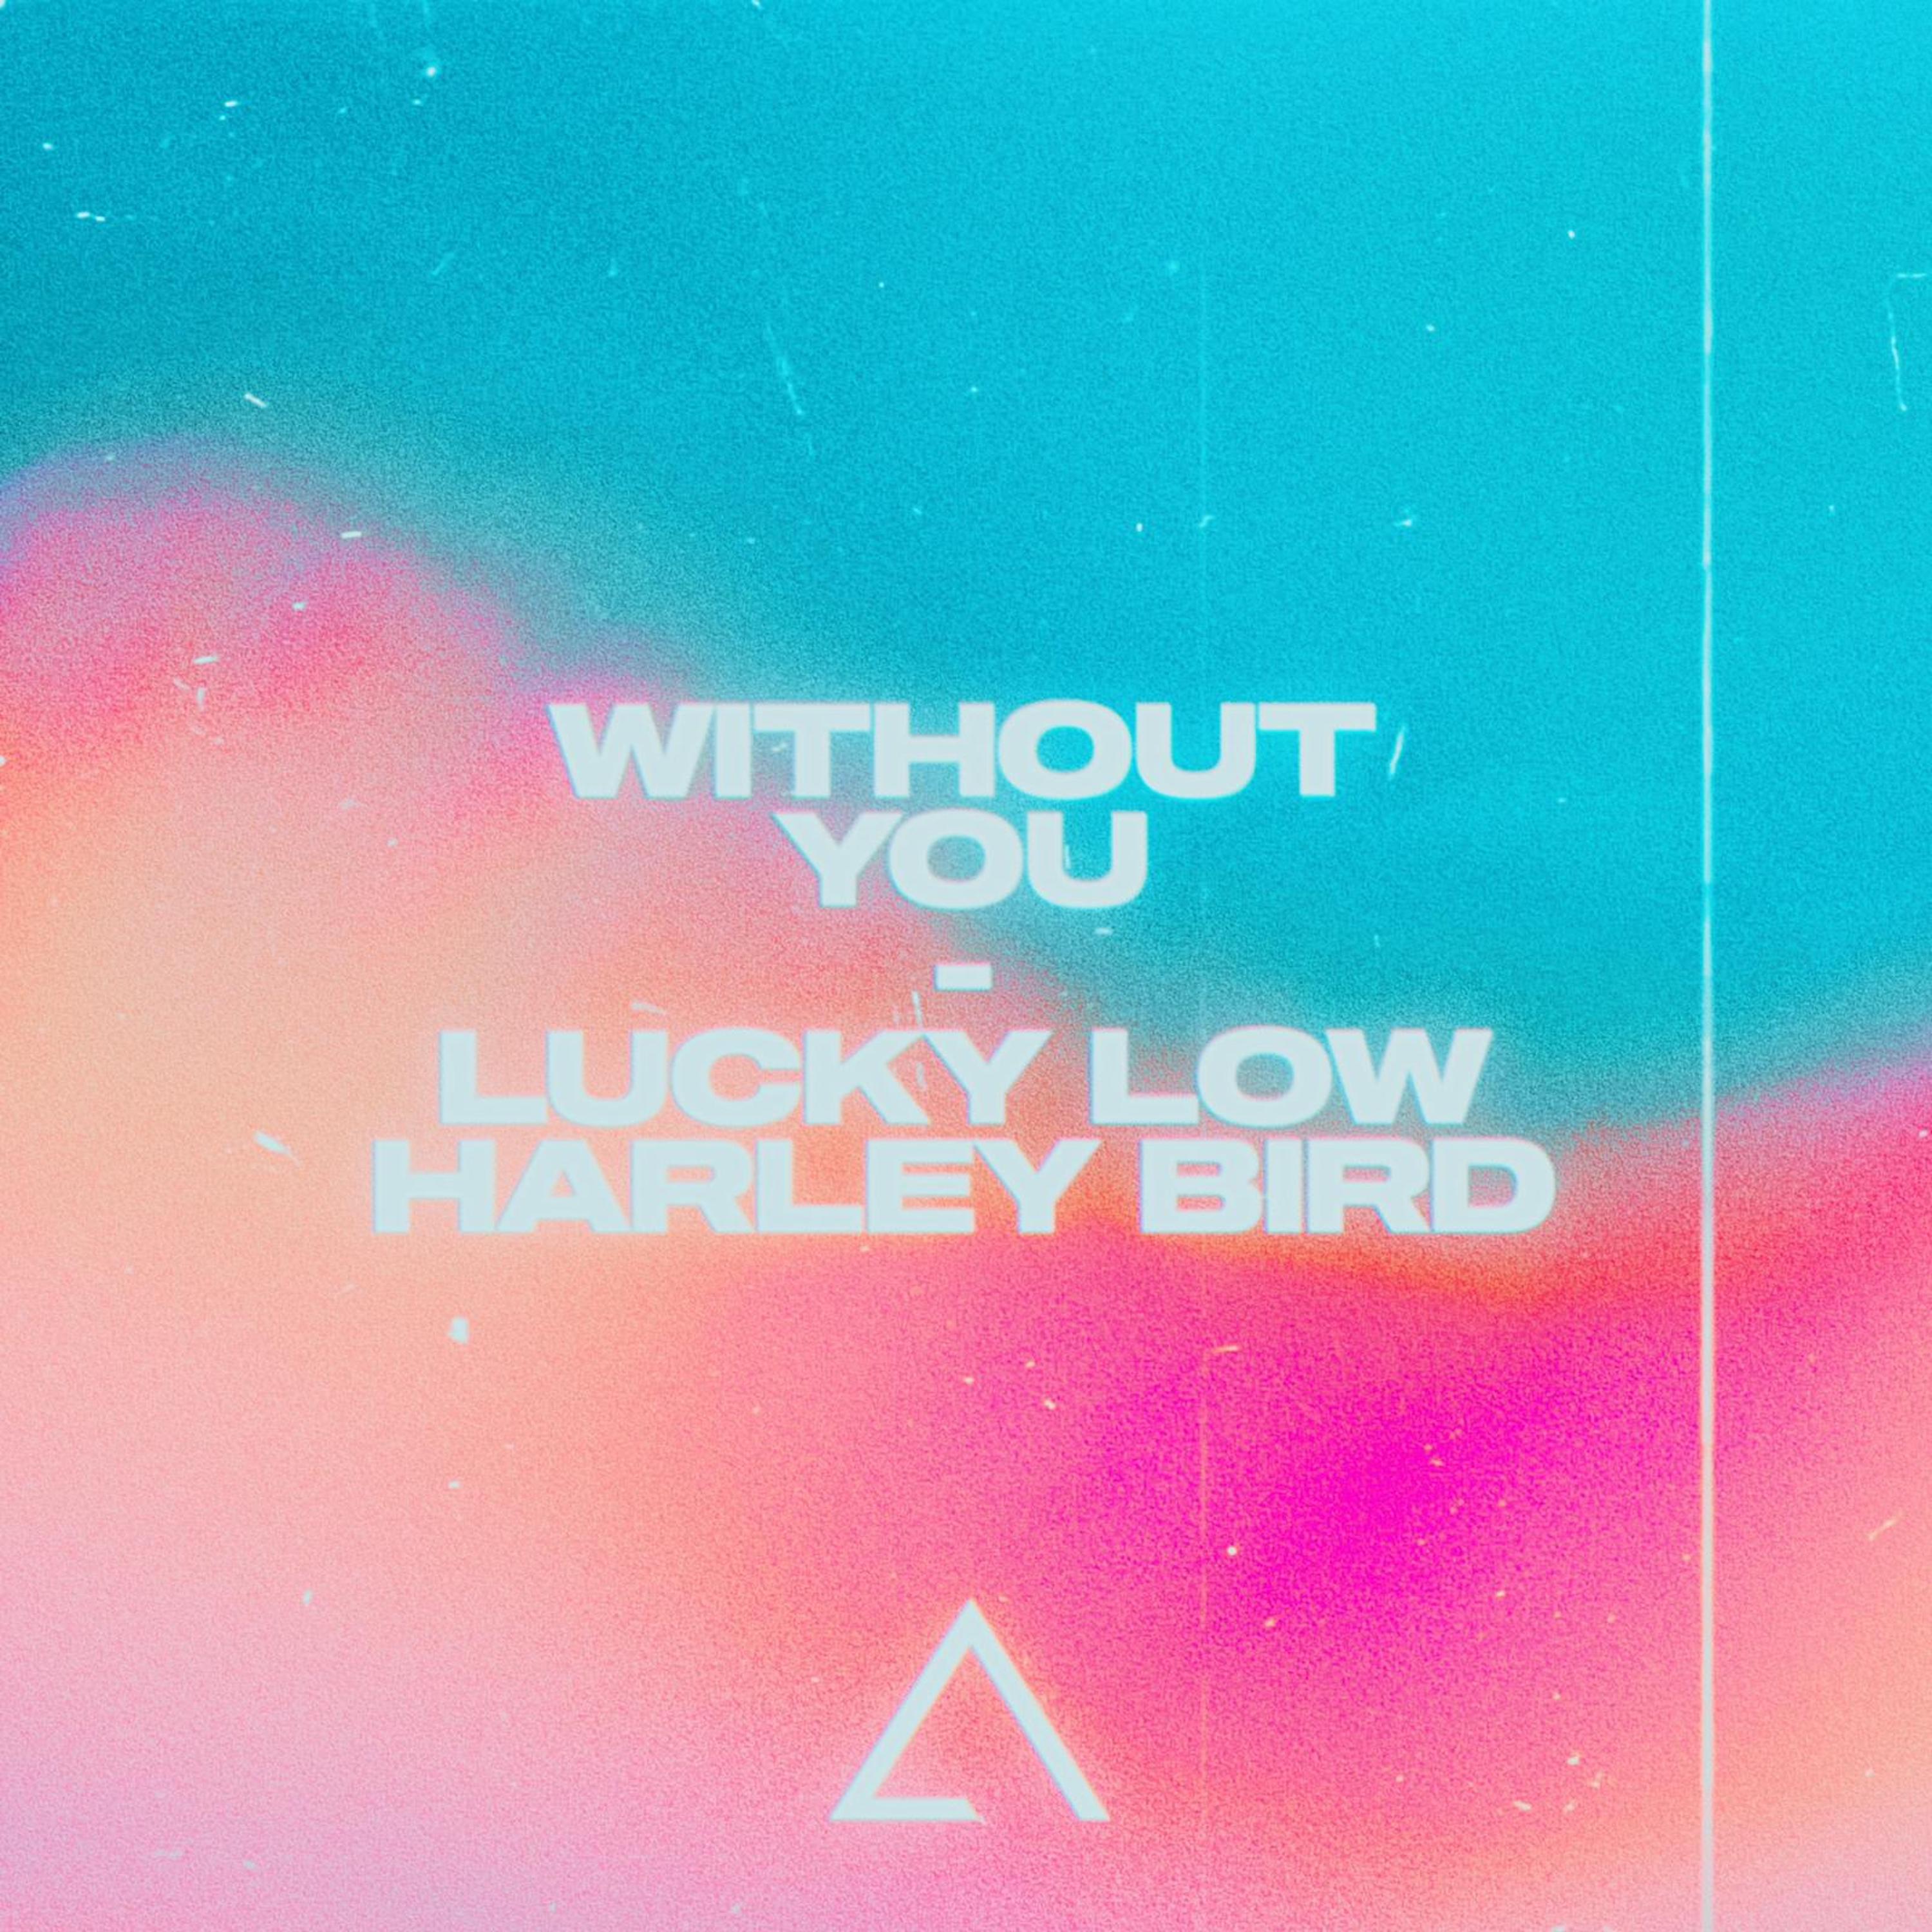 Harley Bird - Without You